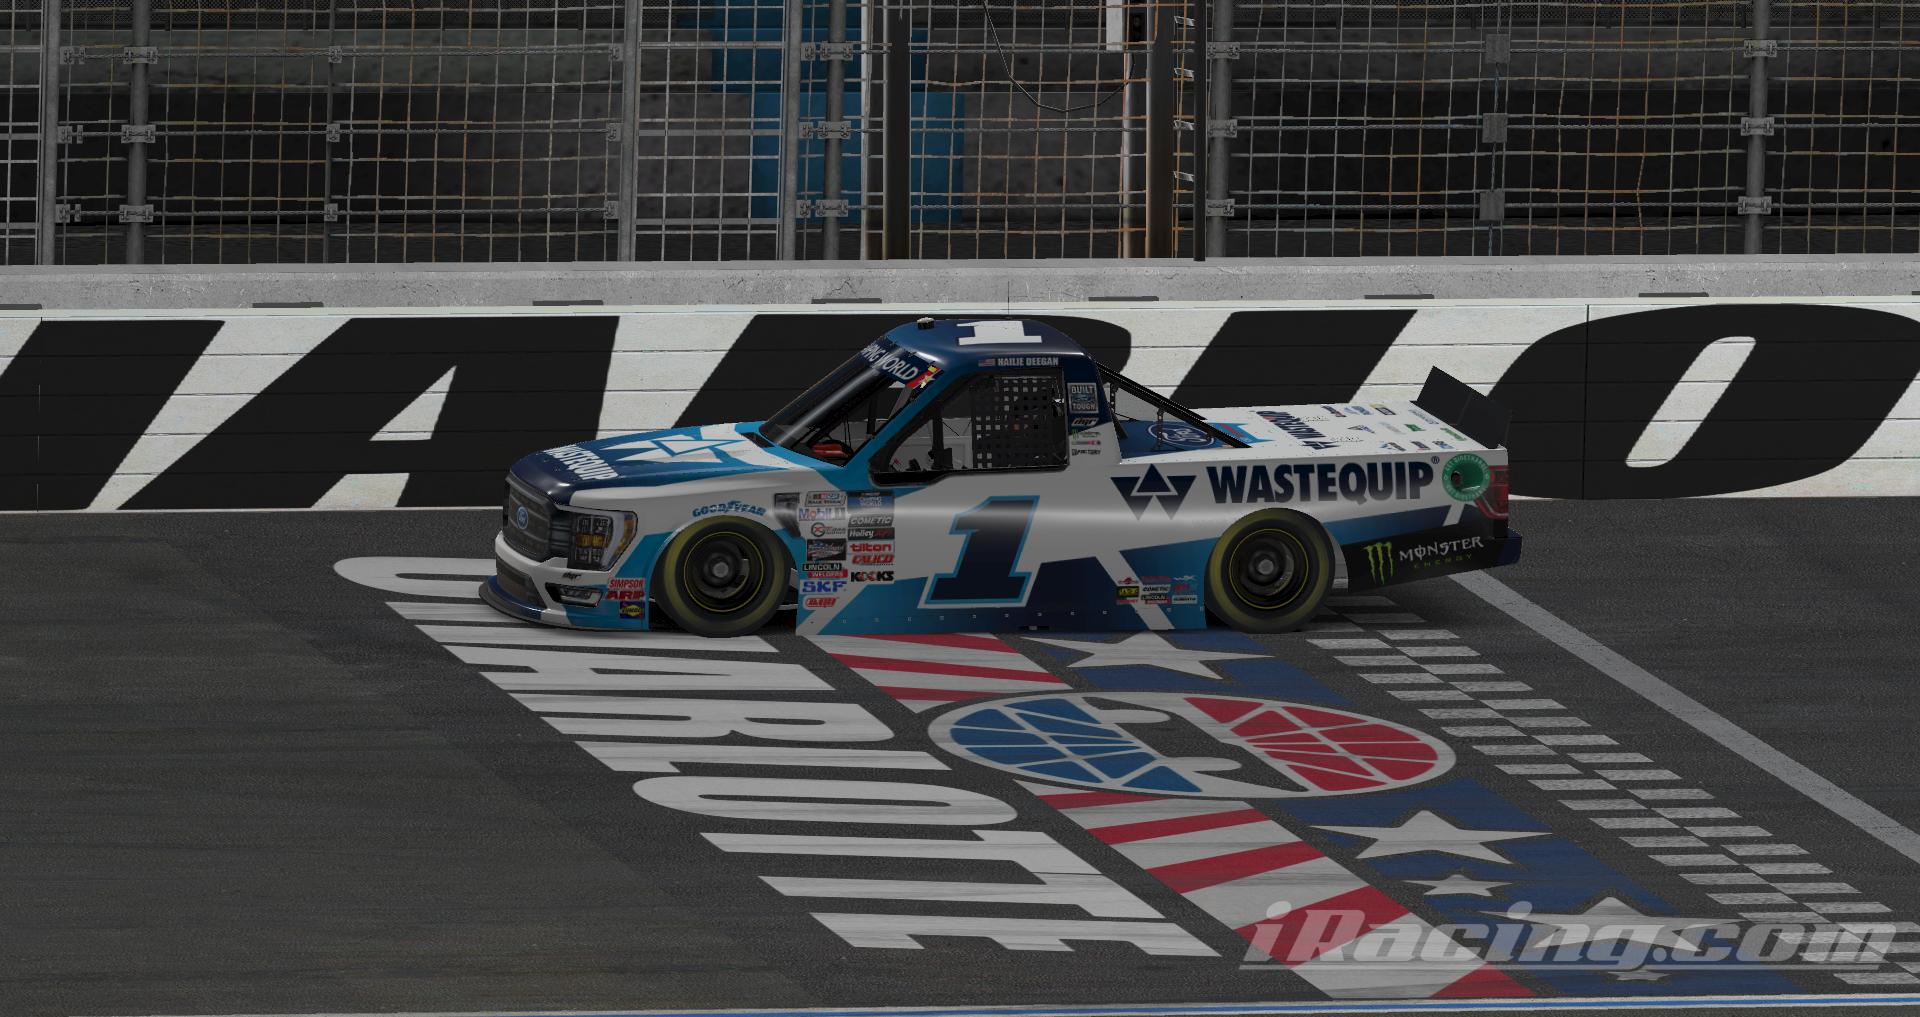 Preview of Hailie Deegan #1 Wastequip V3 2022 NASCAR Camping World Truck Series With Custom Number by Ryan Broderick